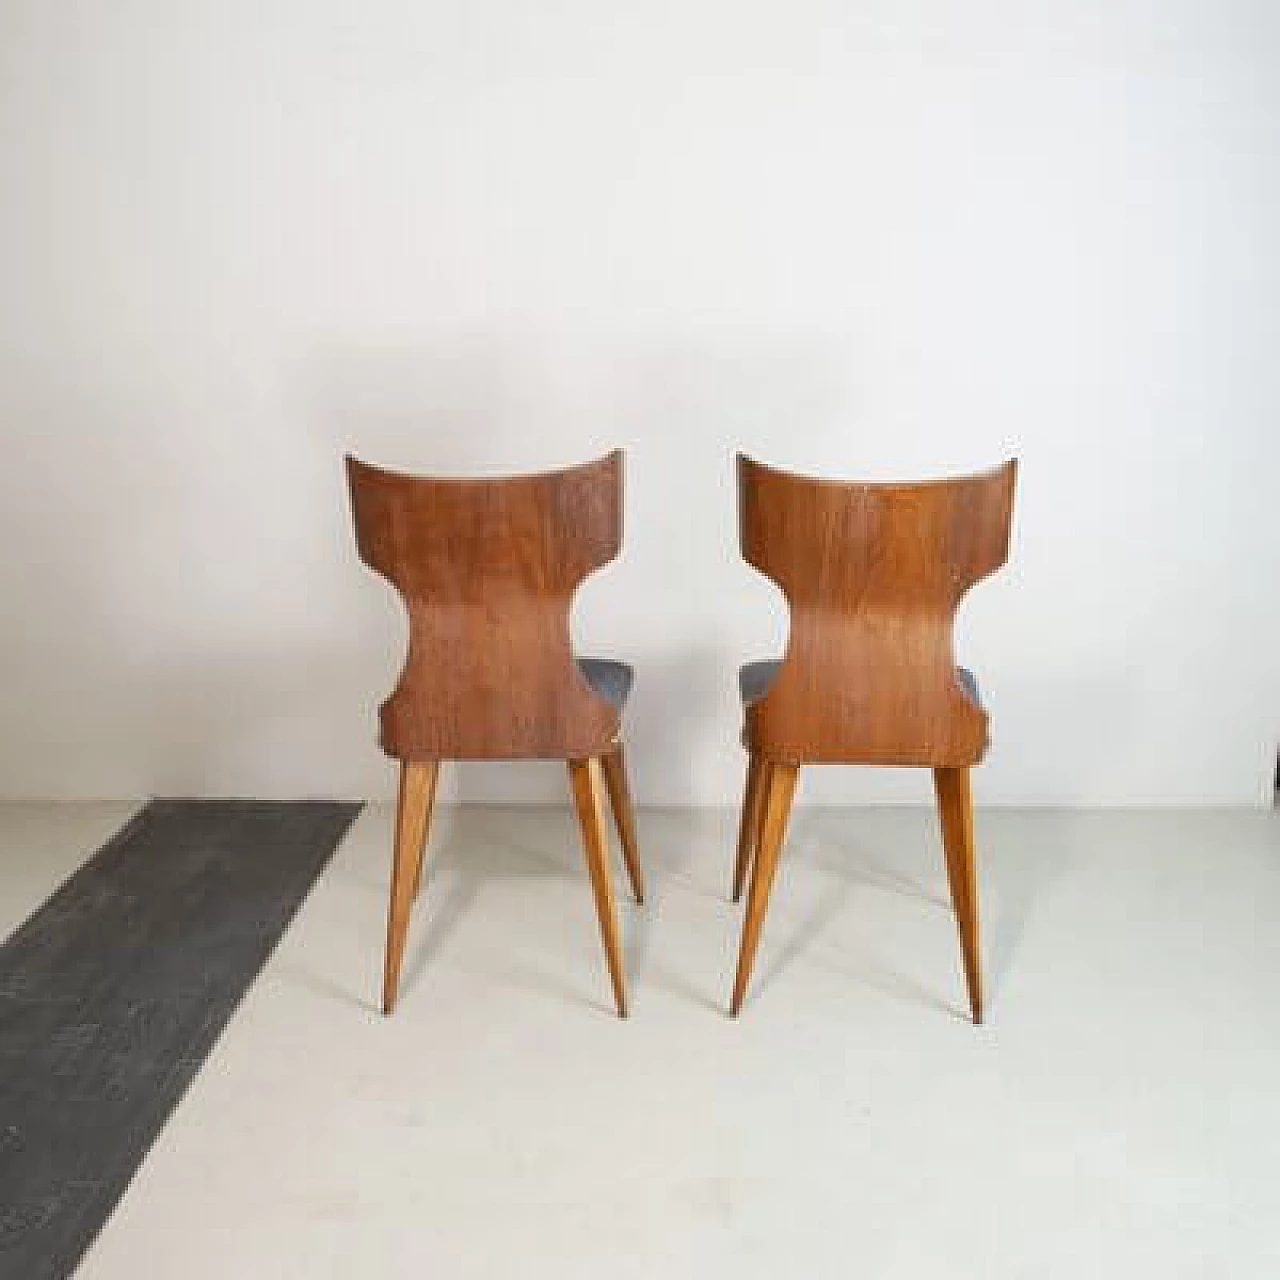 Pair of Curved Wooden Chairs by Carlo Ratti, 1950s 4